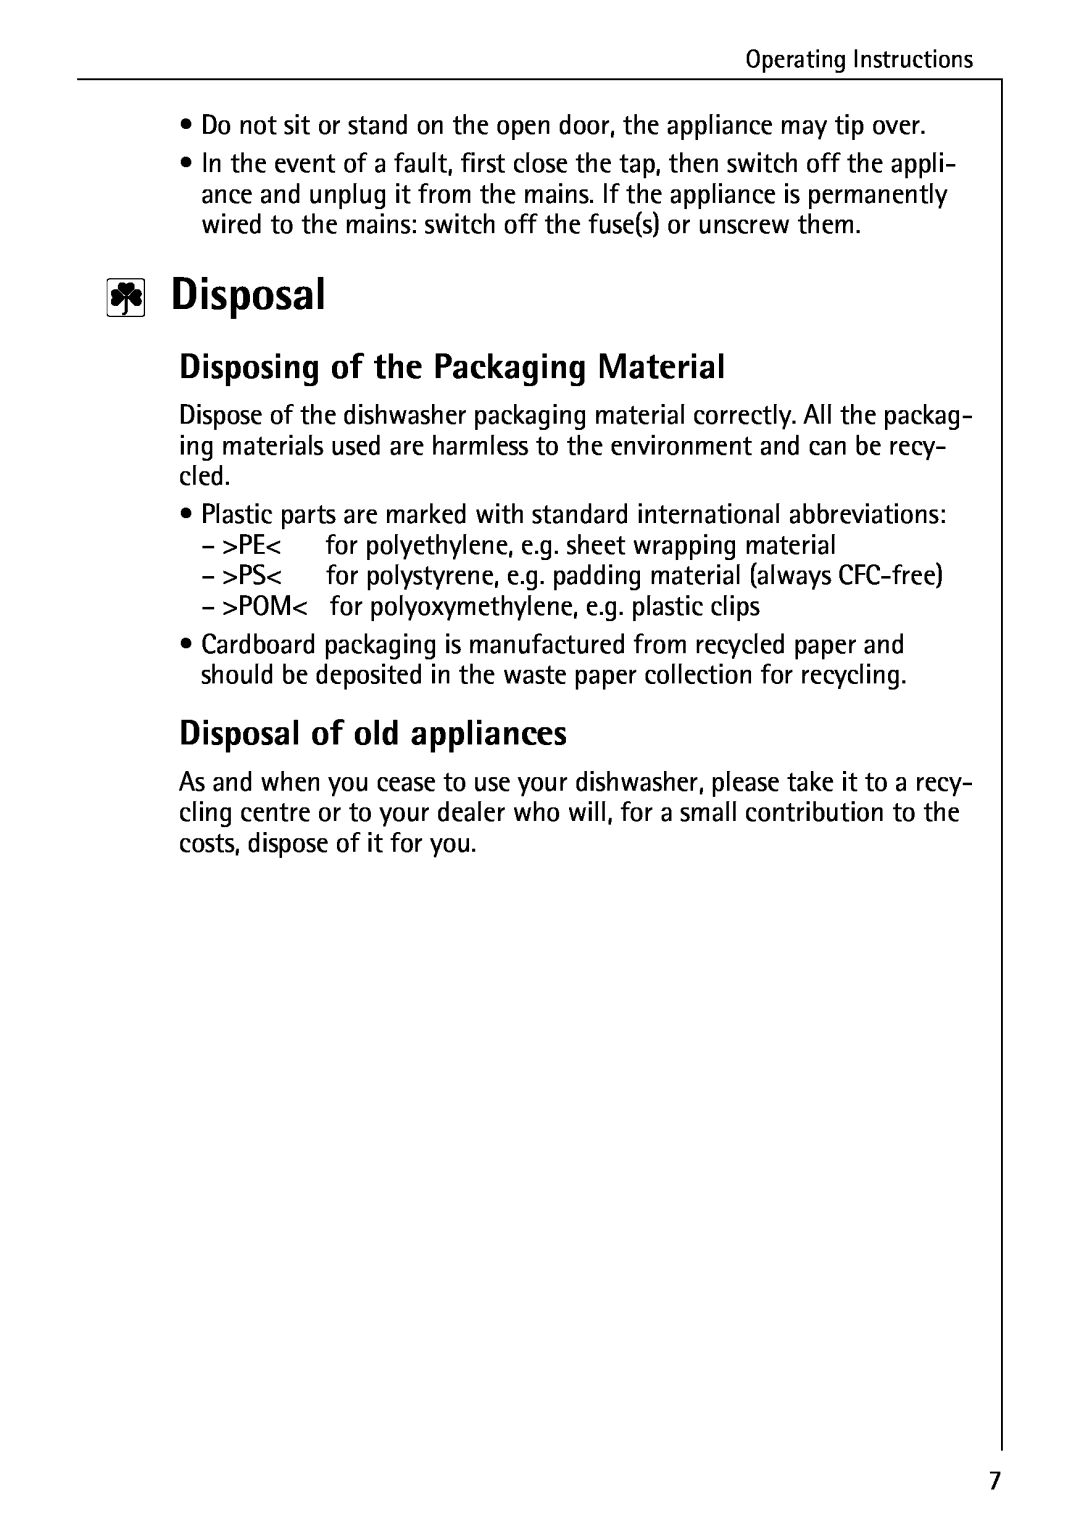 AEG 80850 I manual 2Disposal, Disposing of the Packaging Material, Disposal of old appliances 